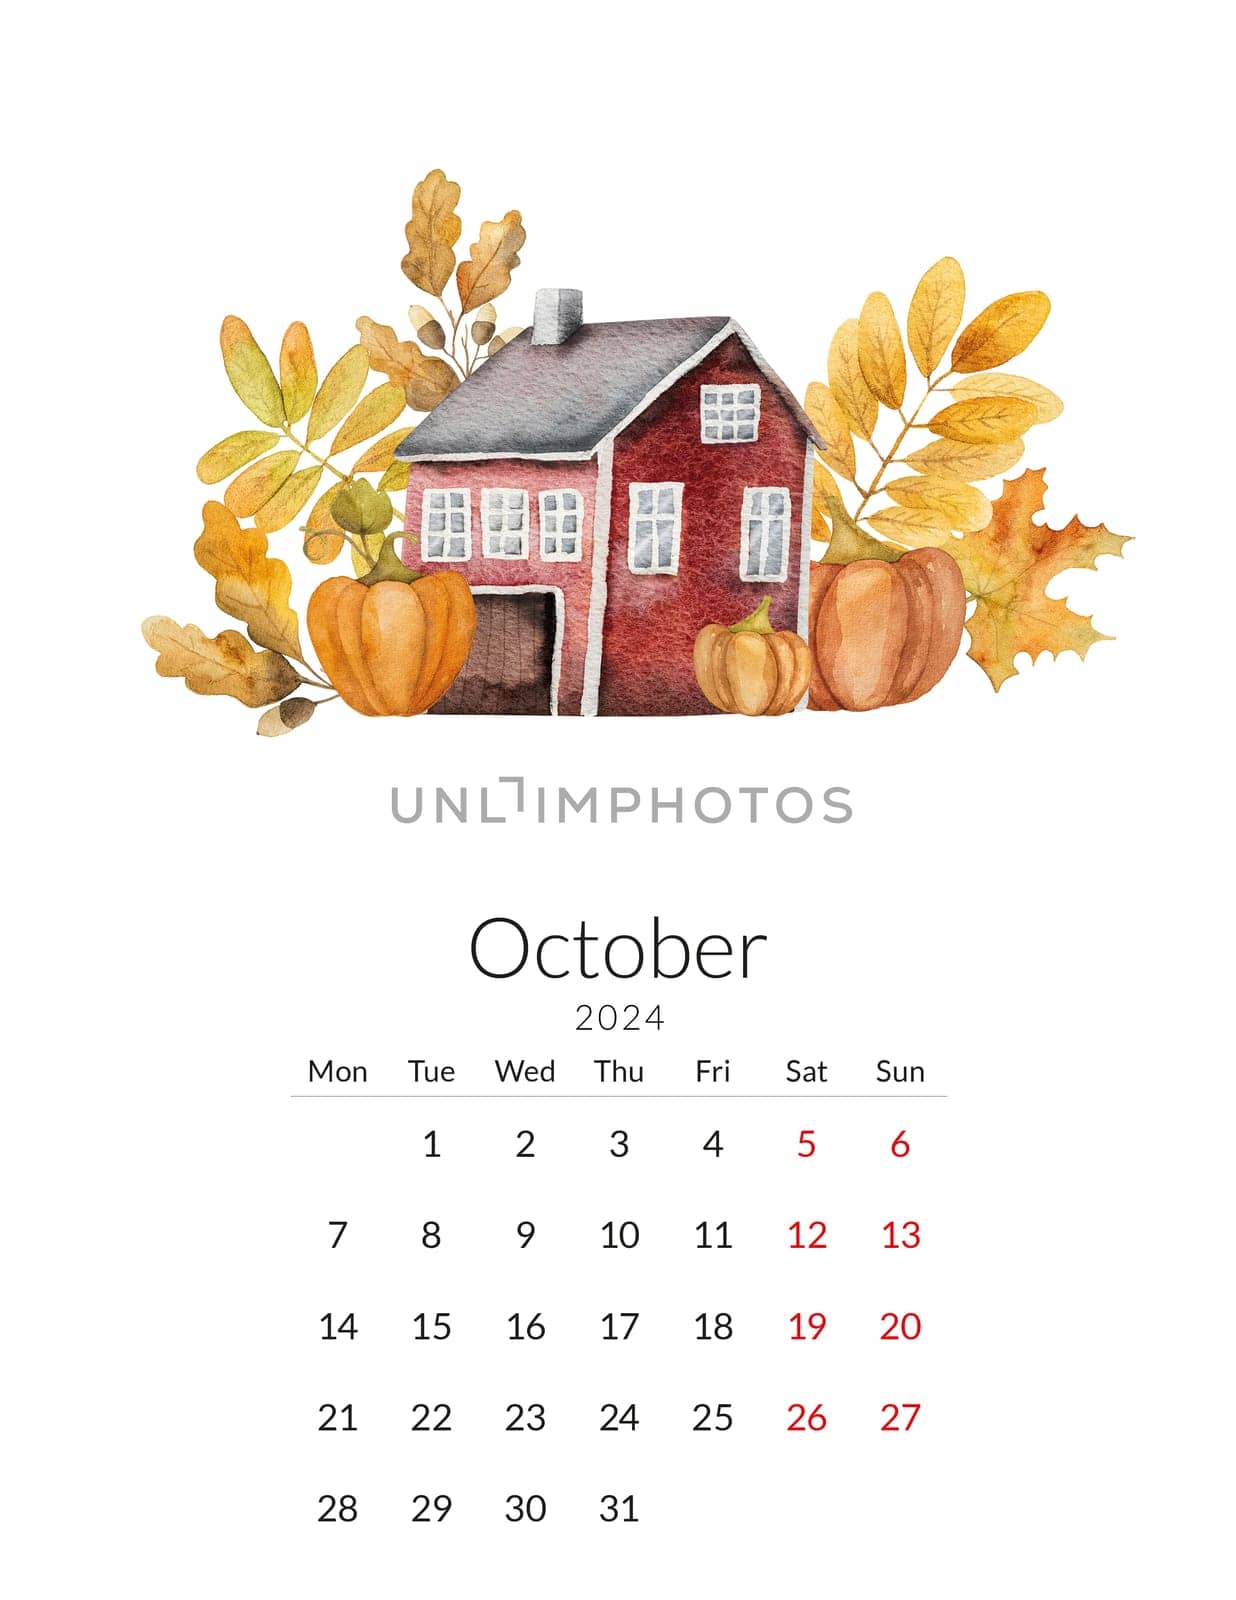 October 2024 calendar template. Handmade watercolor - autumn illustration with pumpkins and a house